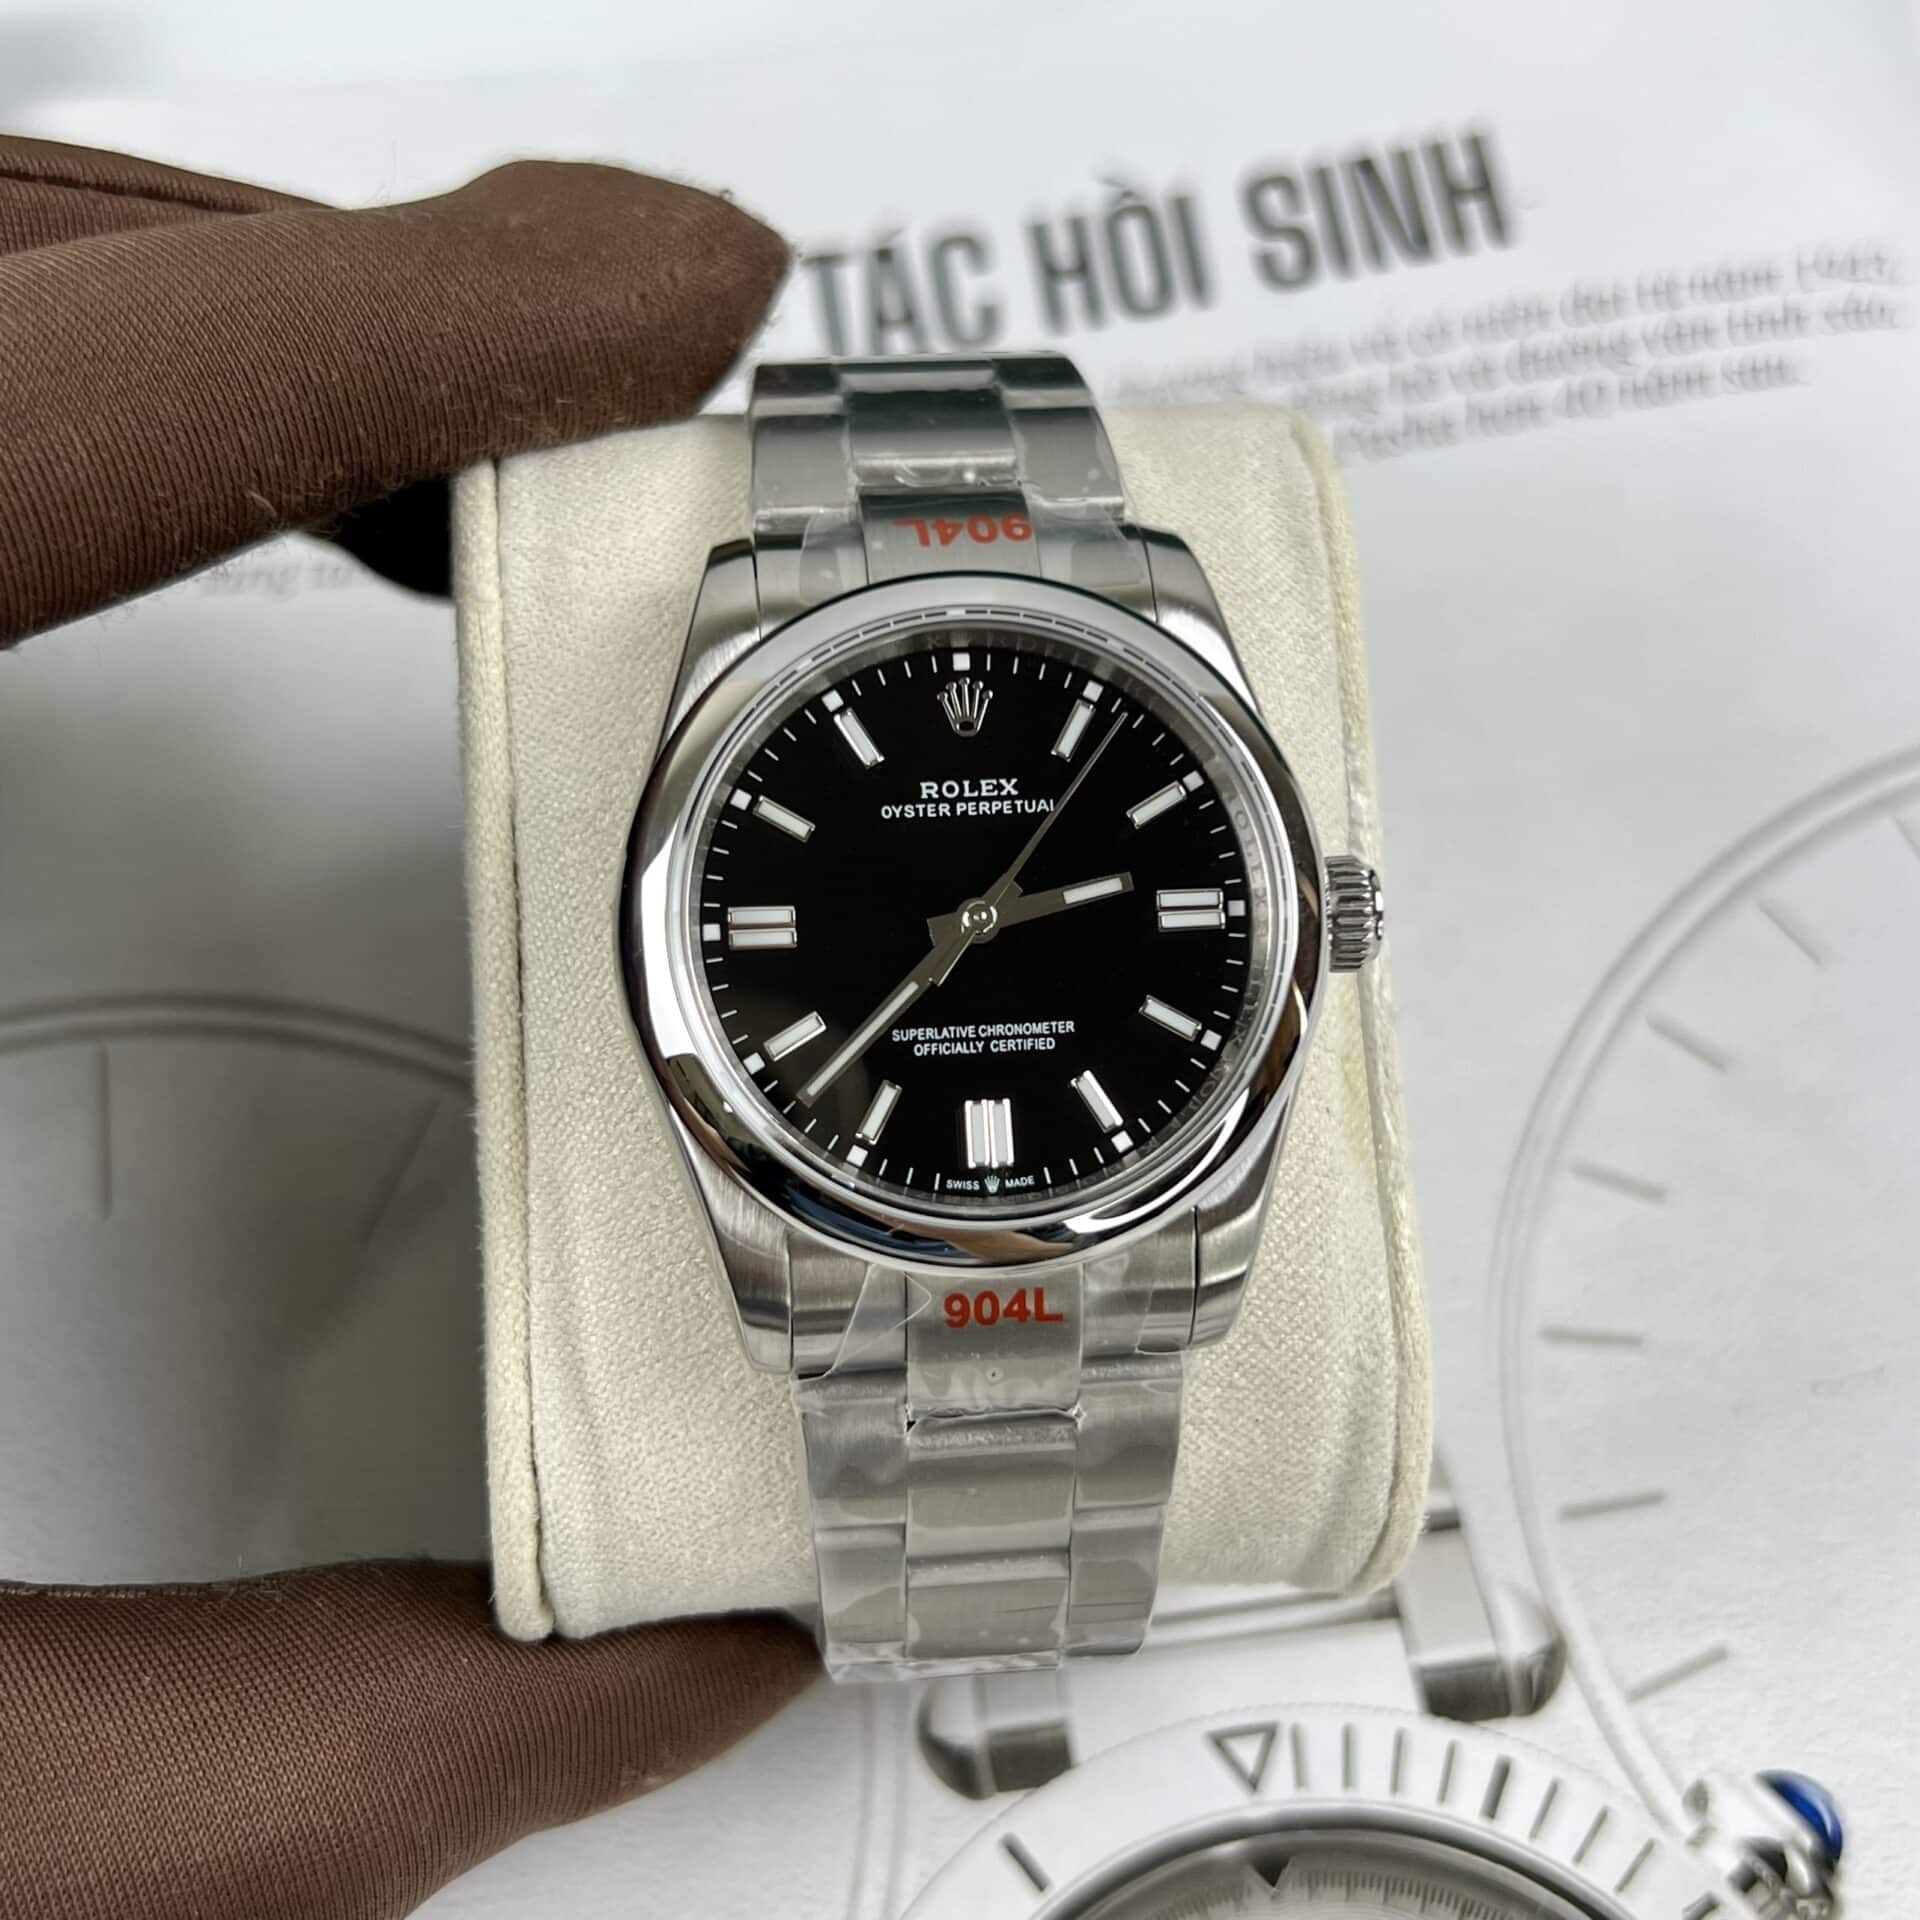 ĐỒNG HỒ ROLEX OYSTER PERPETUAL 126000 MẶT SỐ ĐEN REP 11 36MM